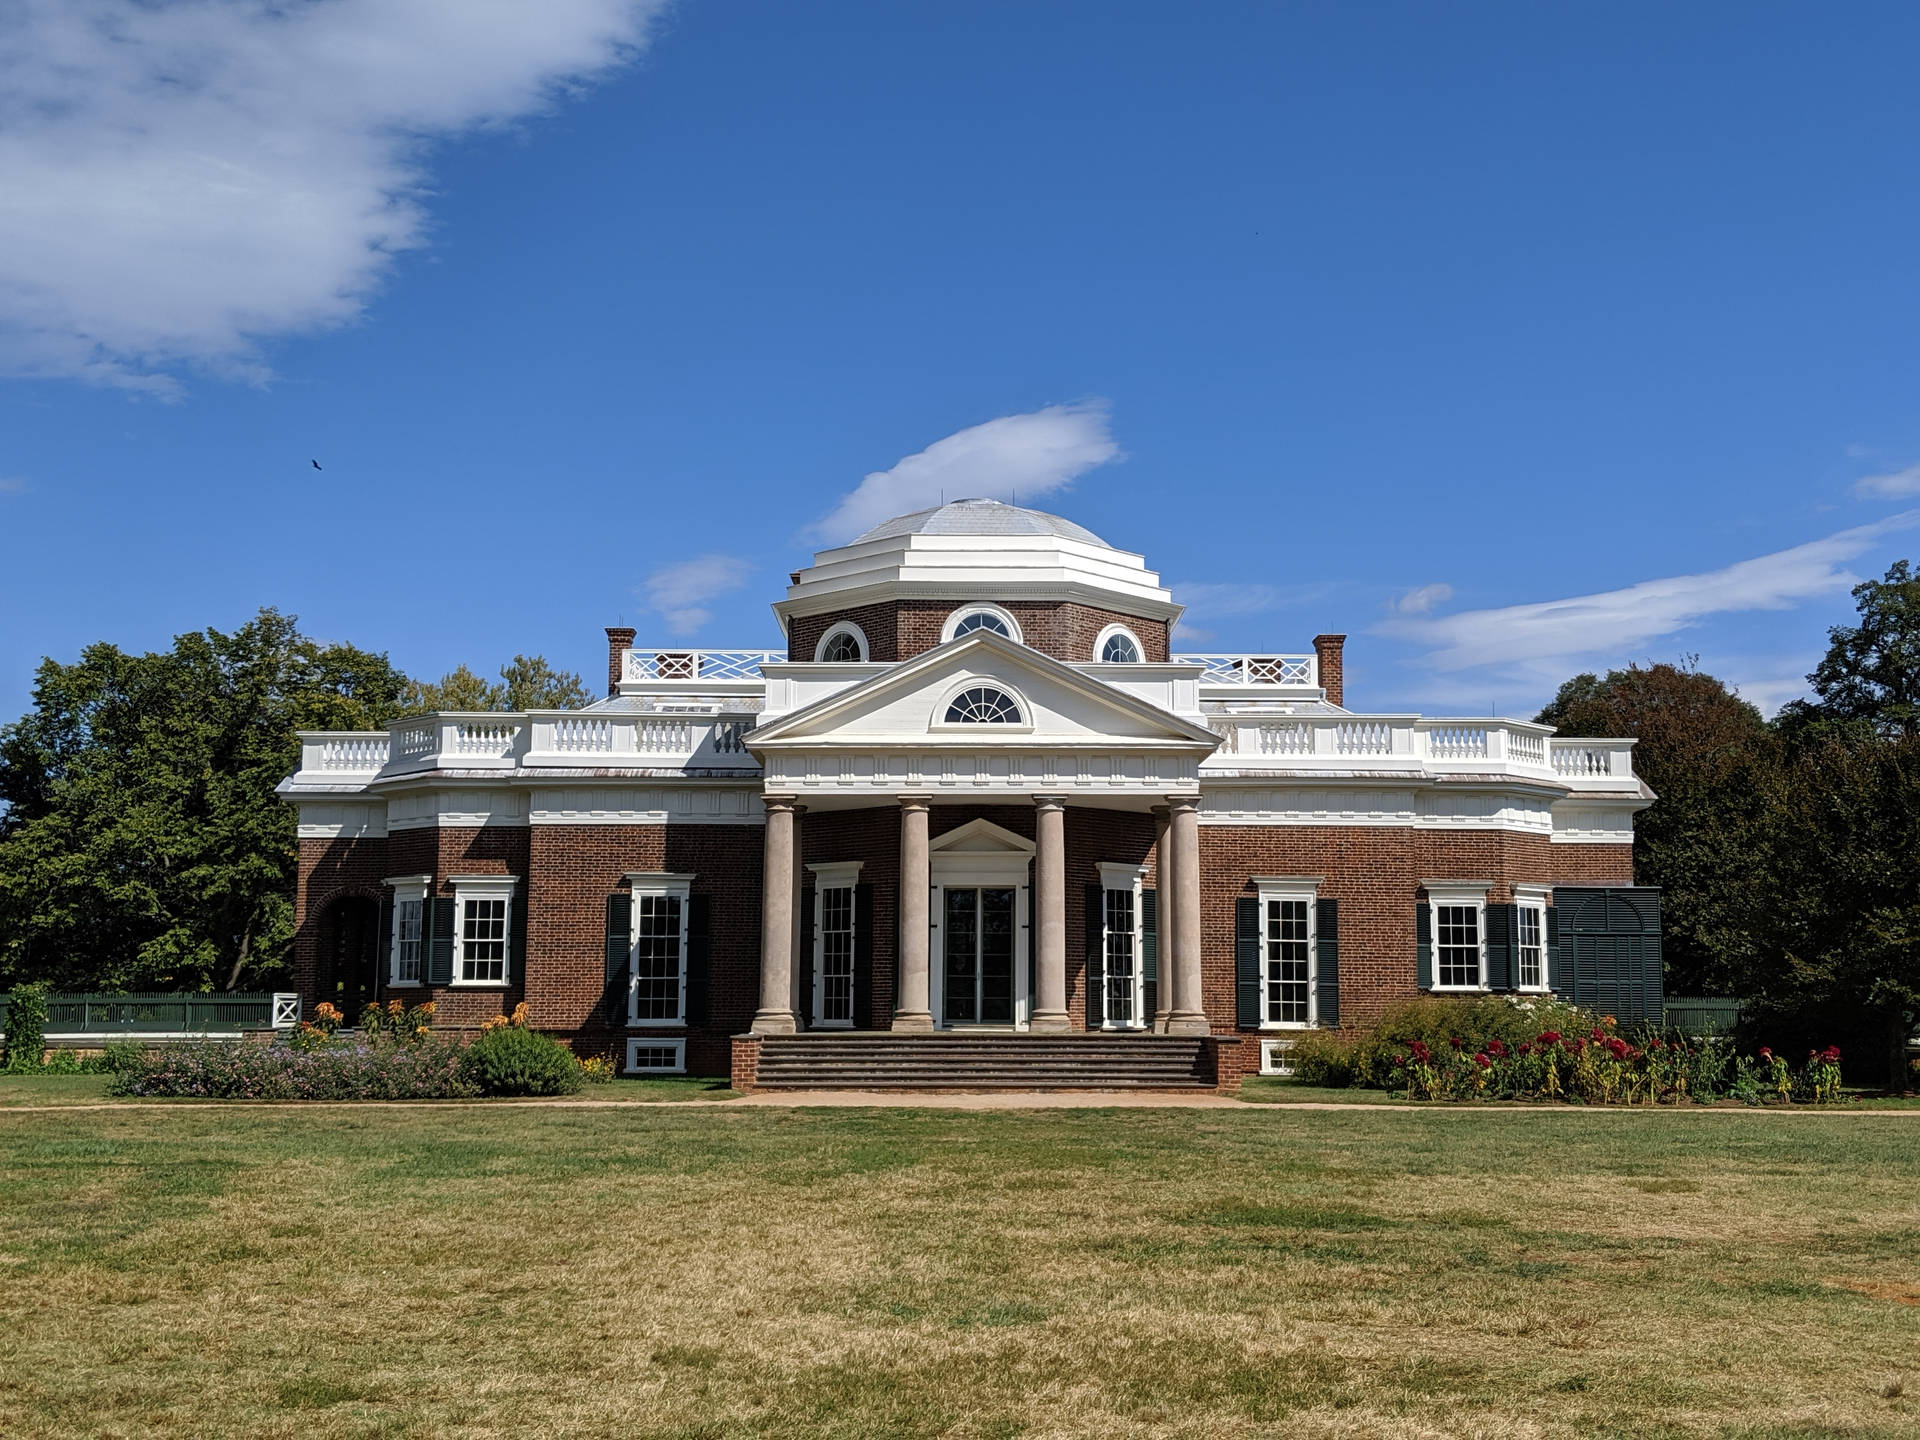 Monticello On Clear Day Wallpaper